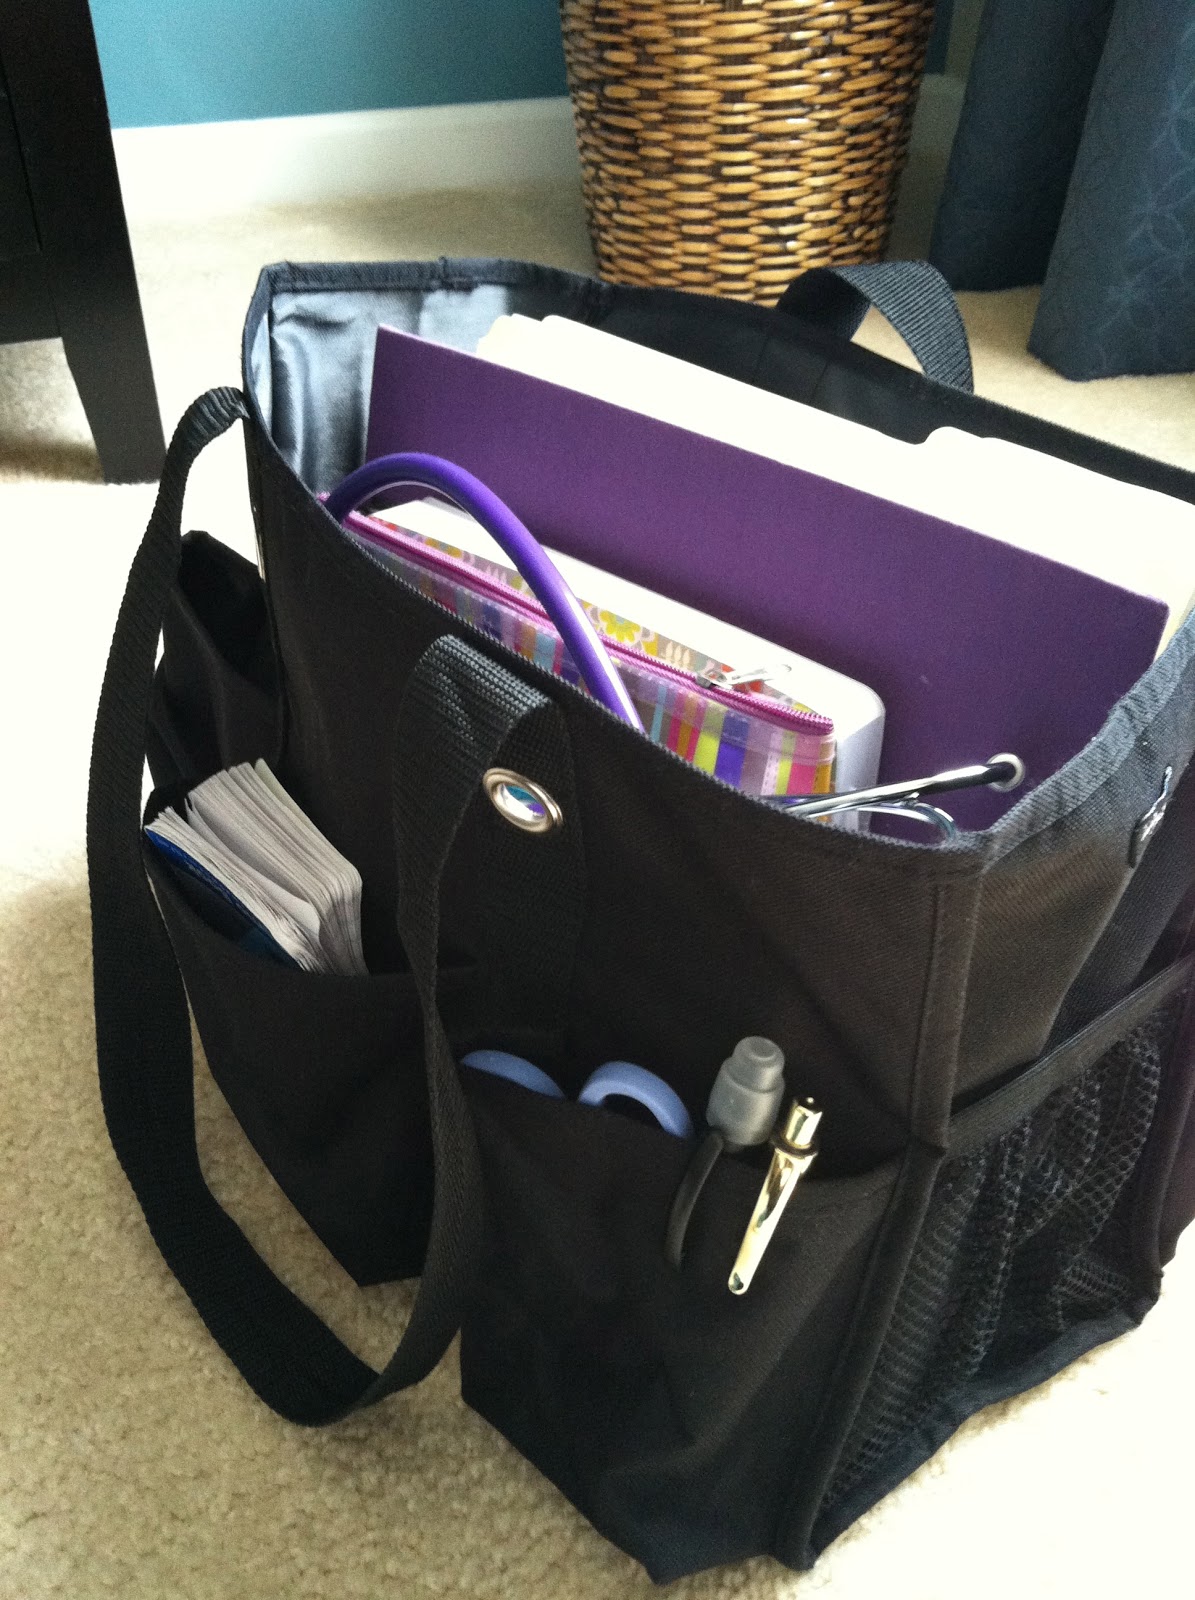 Nursing Student and Beyond!: Take a peek inside my clinicals bag!